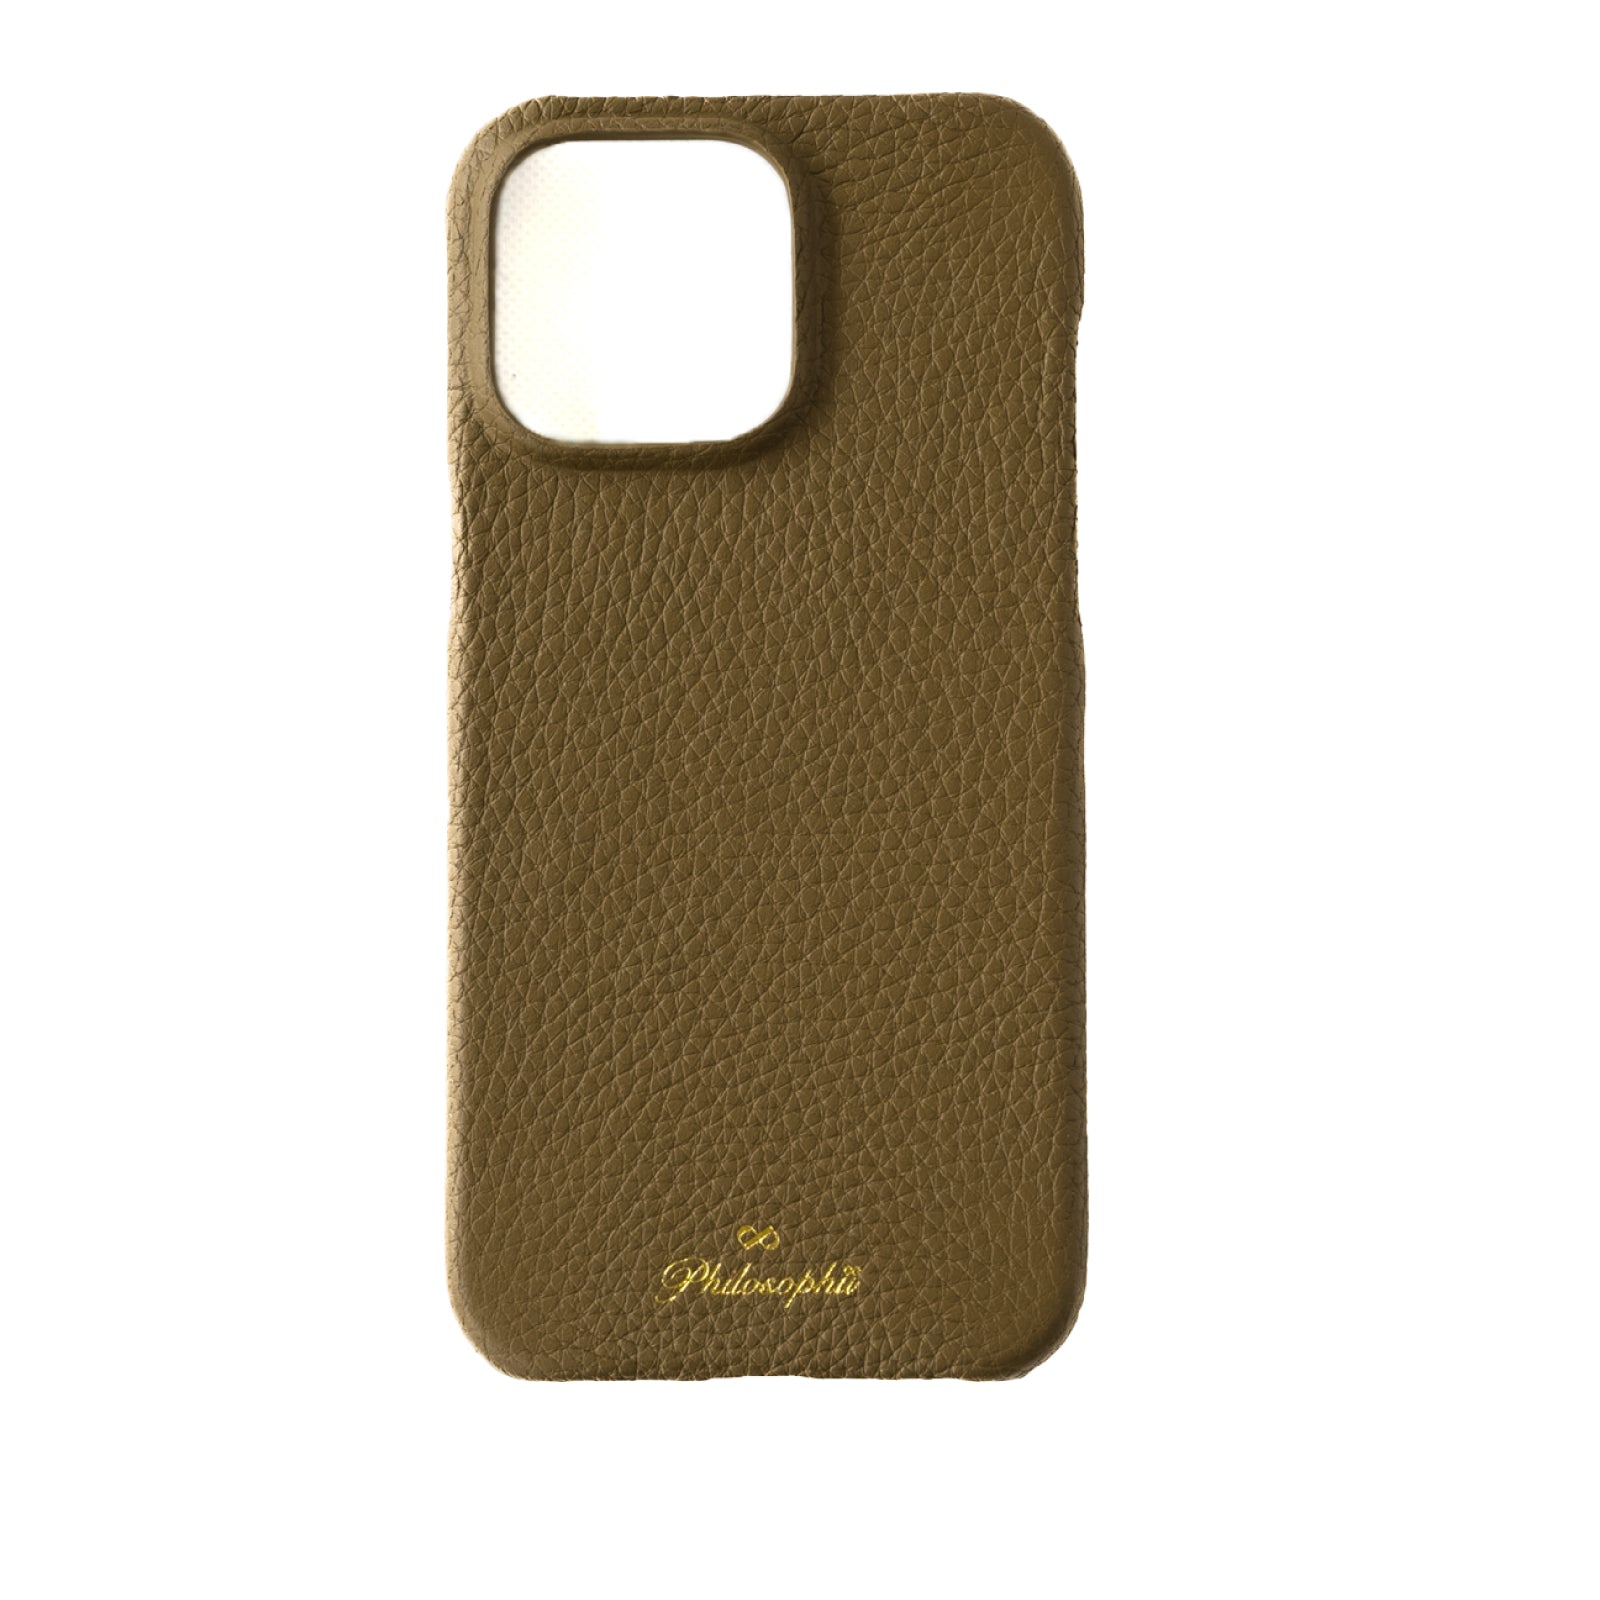 [6th Anniversary Thanksgiving] iPhone Back Cover (iPhone15 ProMax/Etoupe) Taurillon Clemence